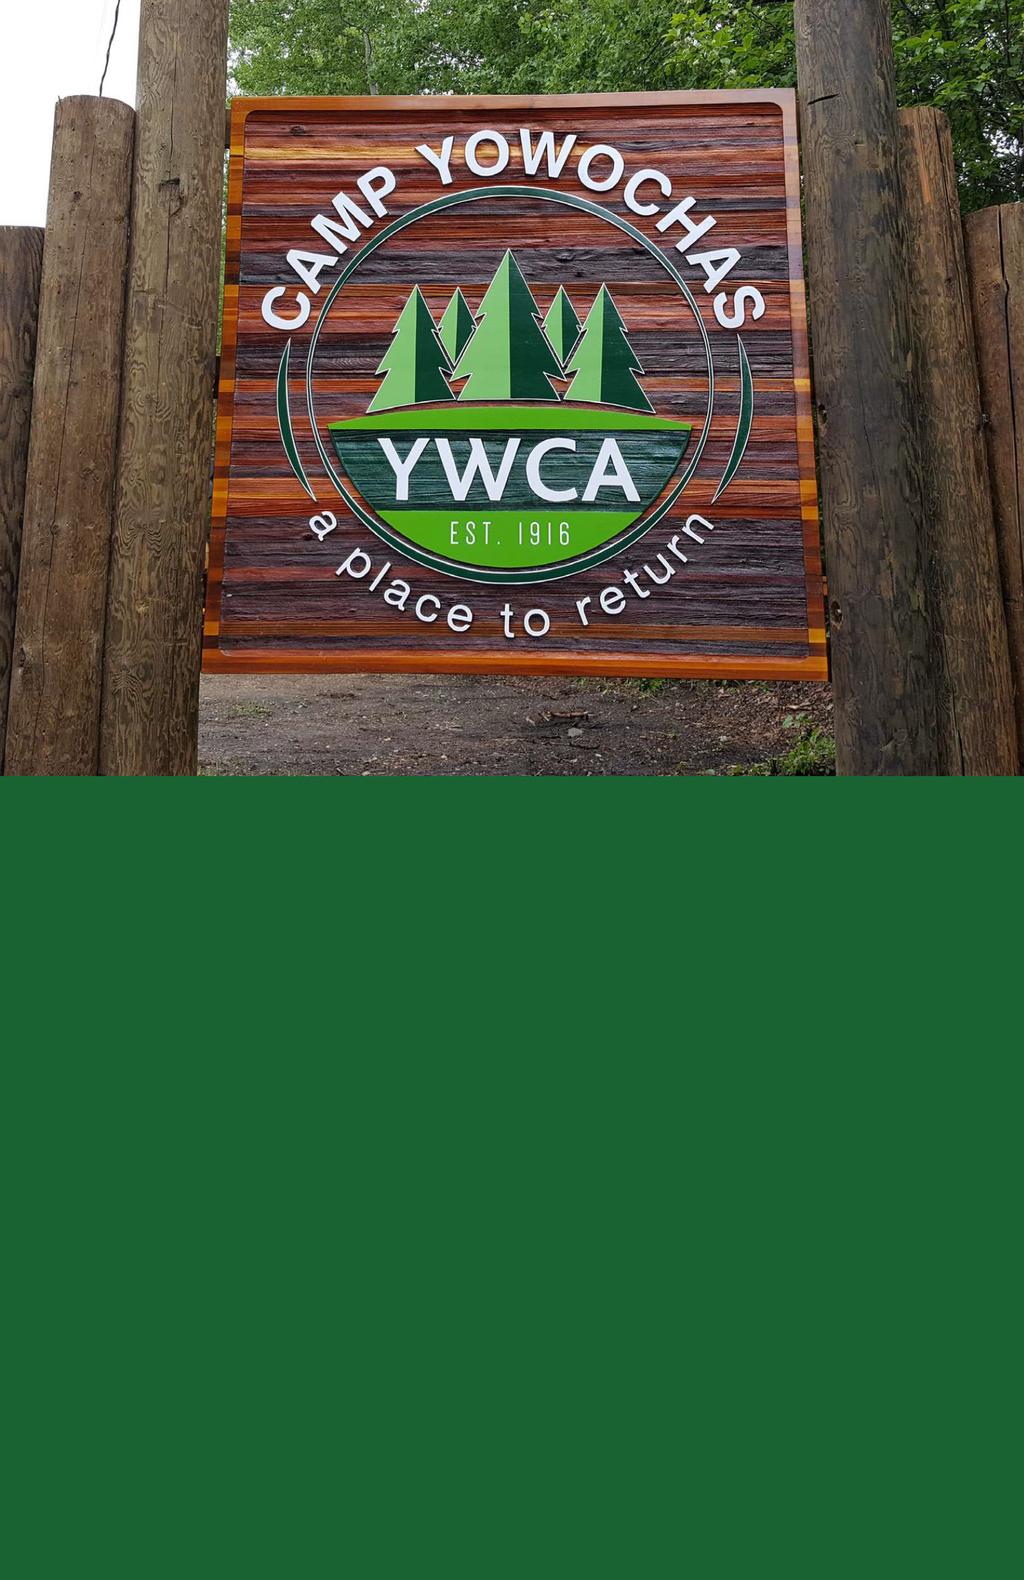 CAMPER SUBSIDY Through generous donations made by community members, Camp Yowochas is able to provide financial assistance to campers in need.